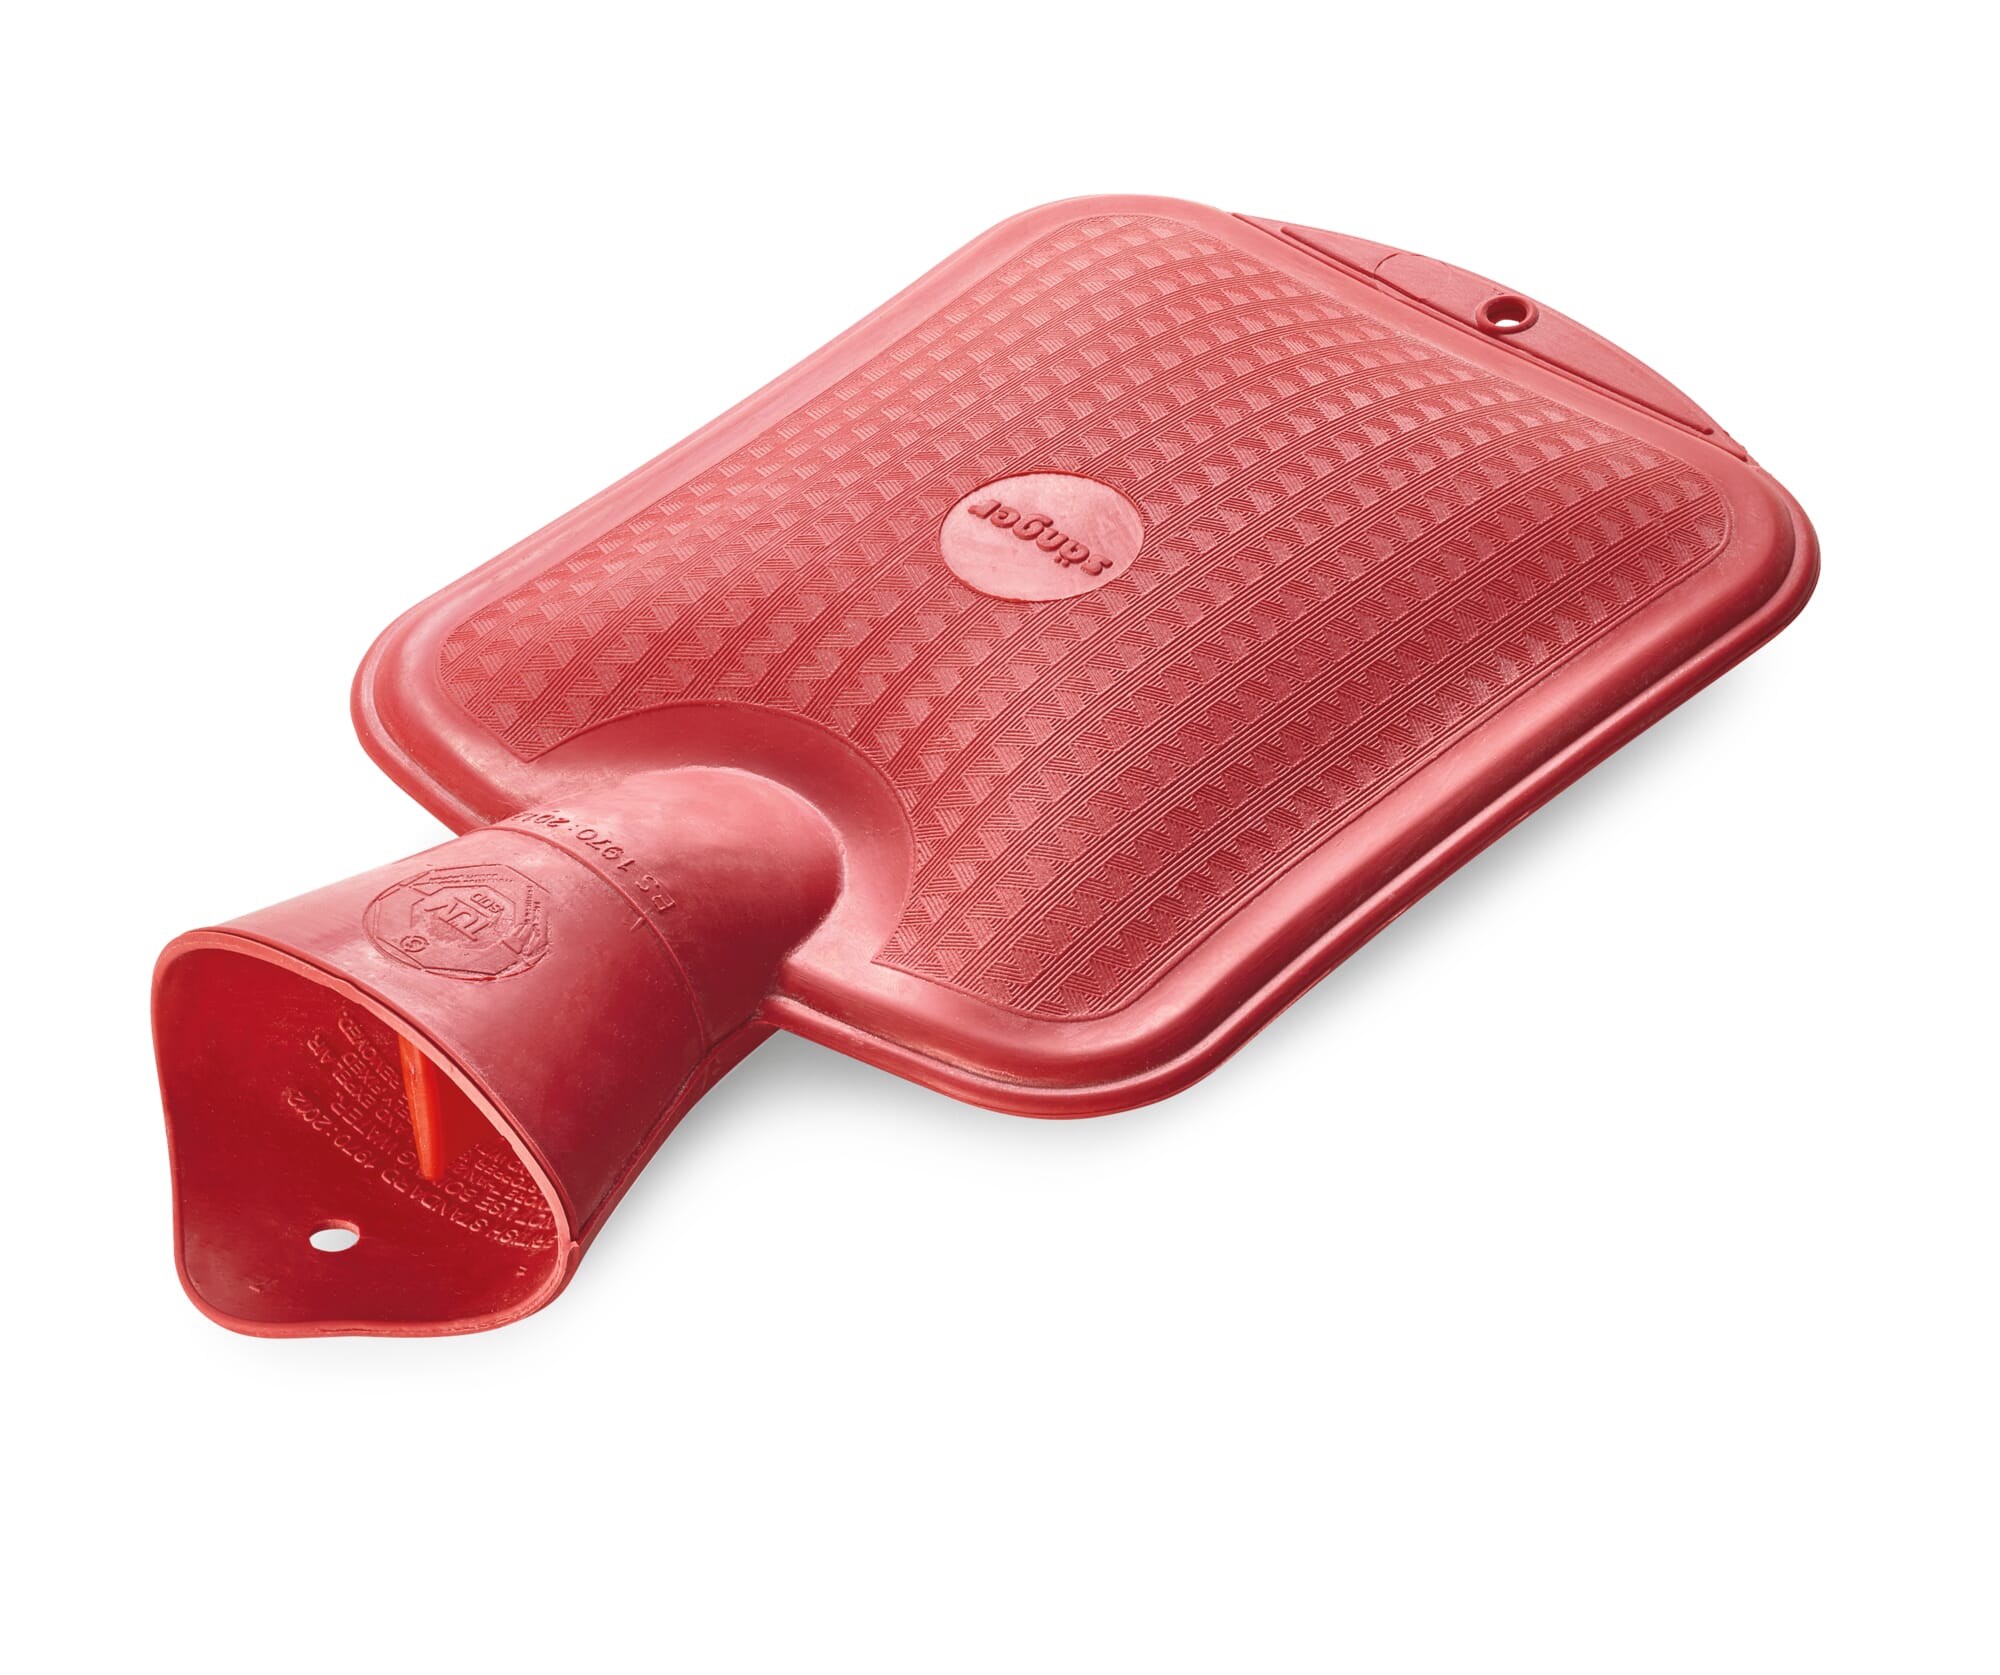 Sänger Rubber Hot Water Bottle - Made in Germany - 2 Litres (Red)